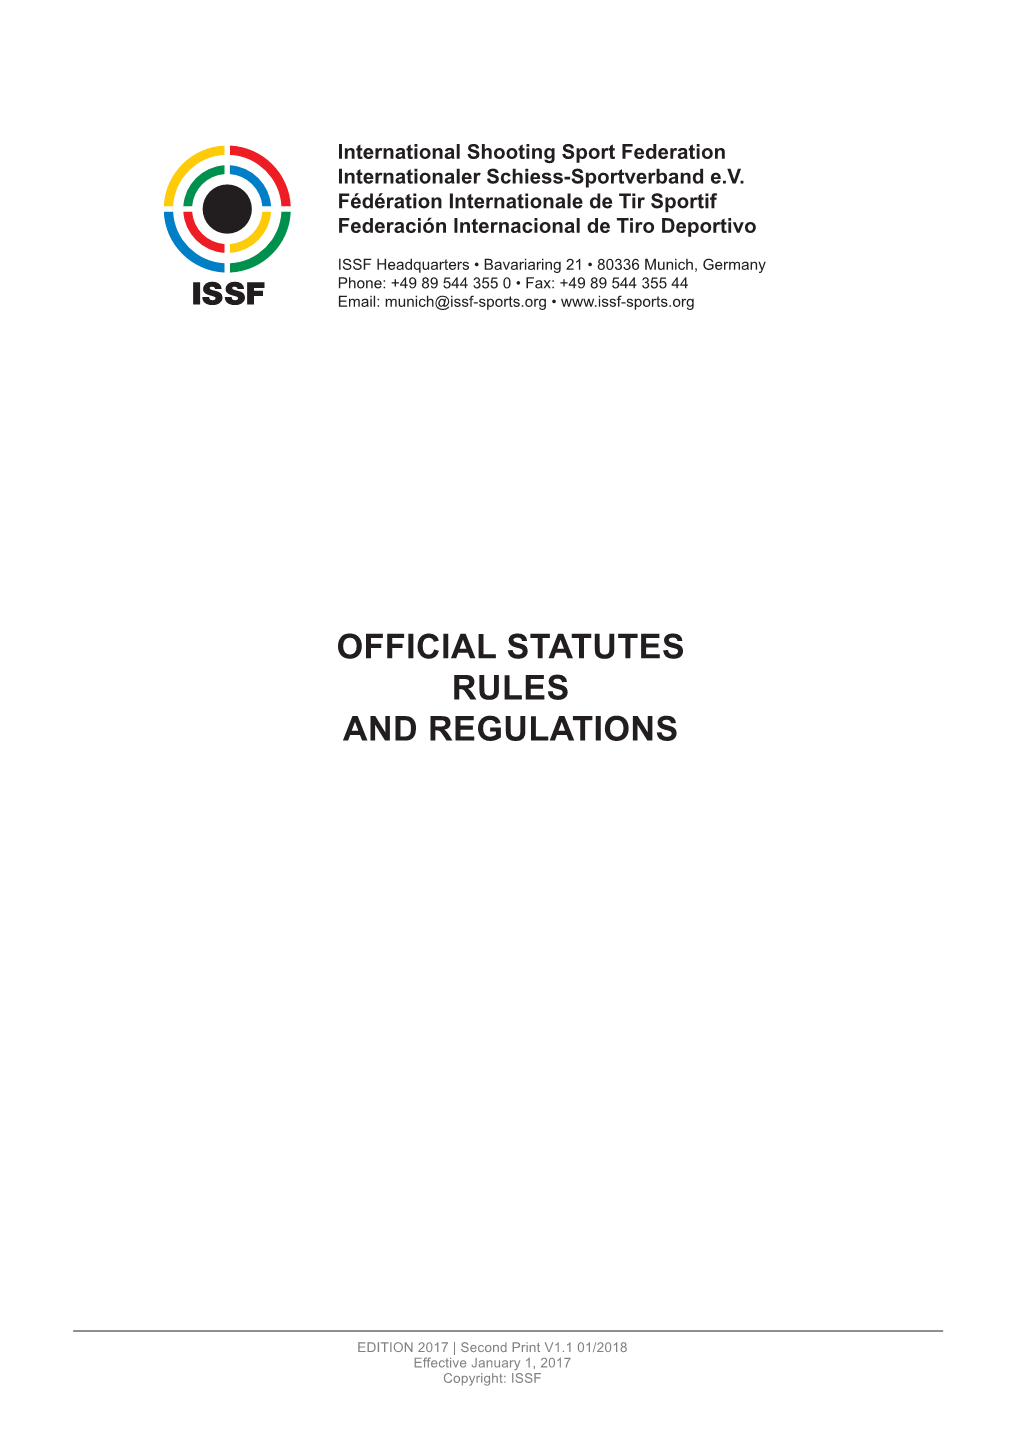 Official Statutes Rules and Regulations